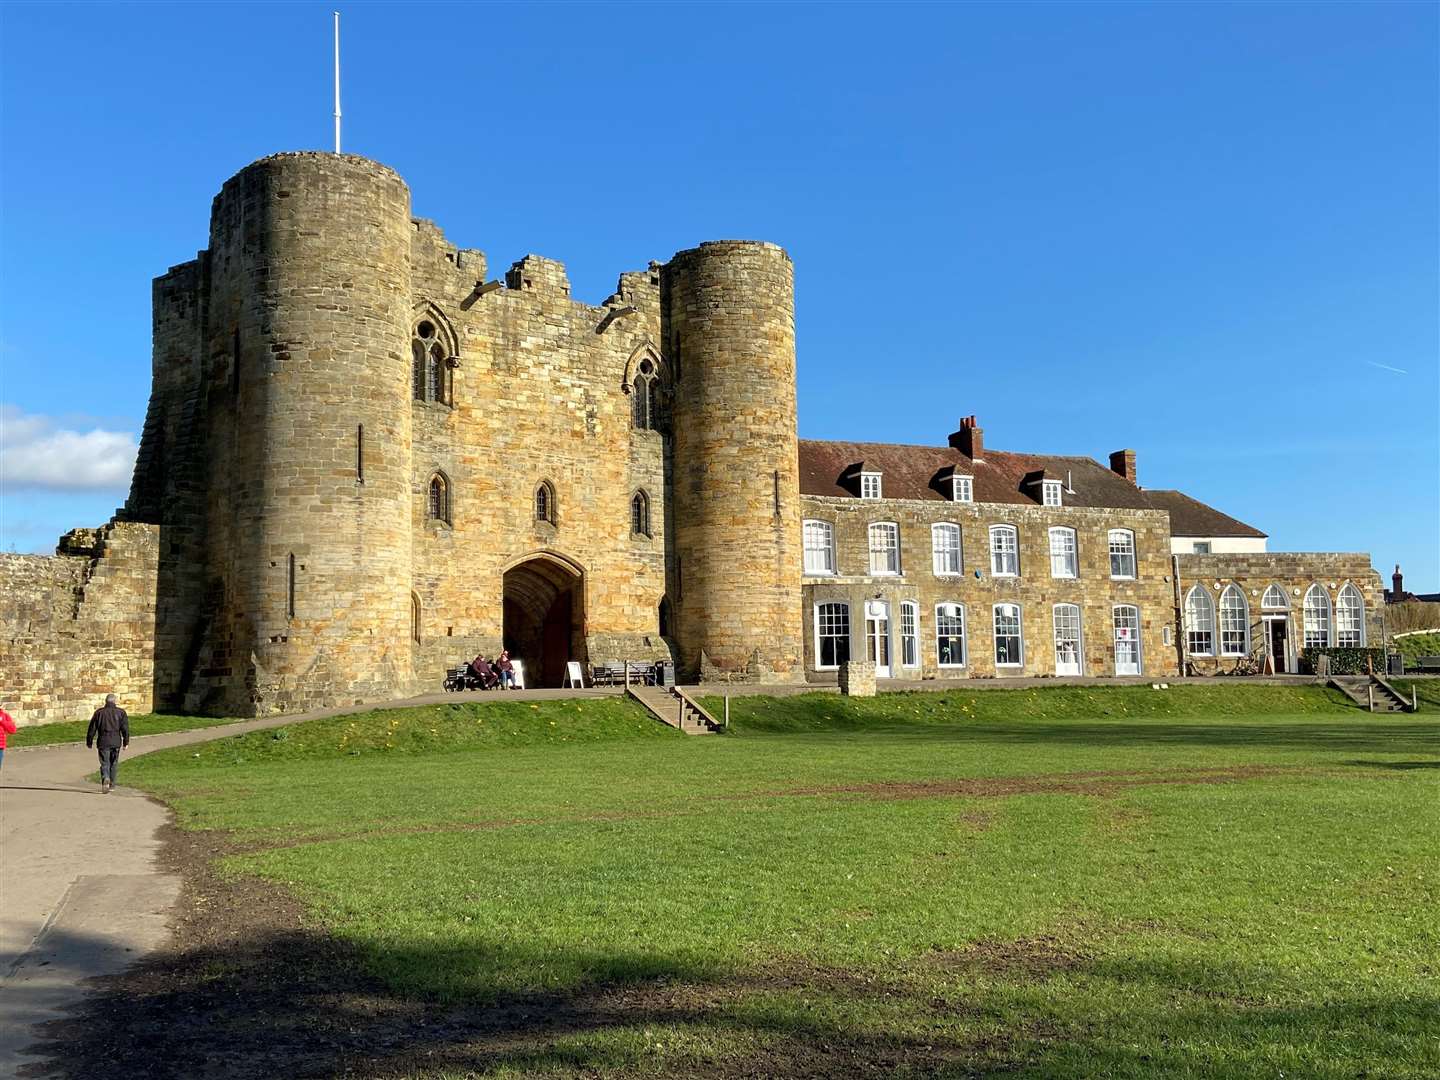 TMBC is asking residents for their opinion on the historic landmark, Tonbridge Castle. Picture: TMBC